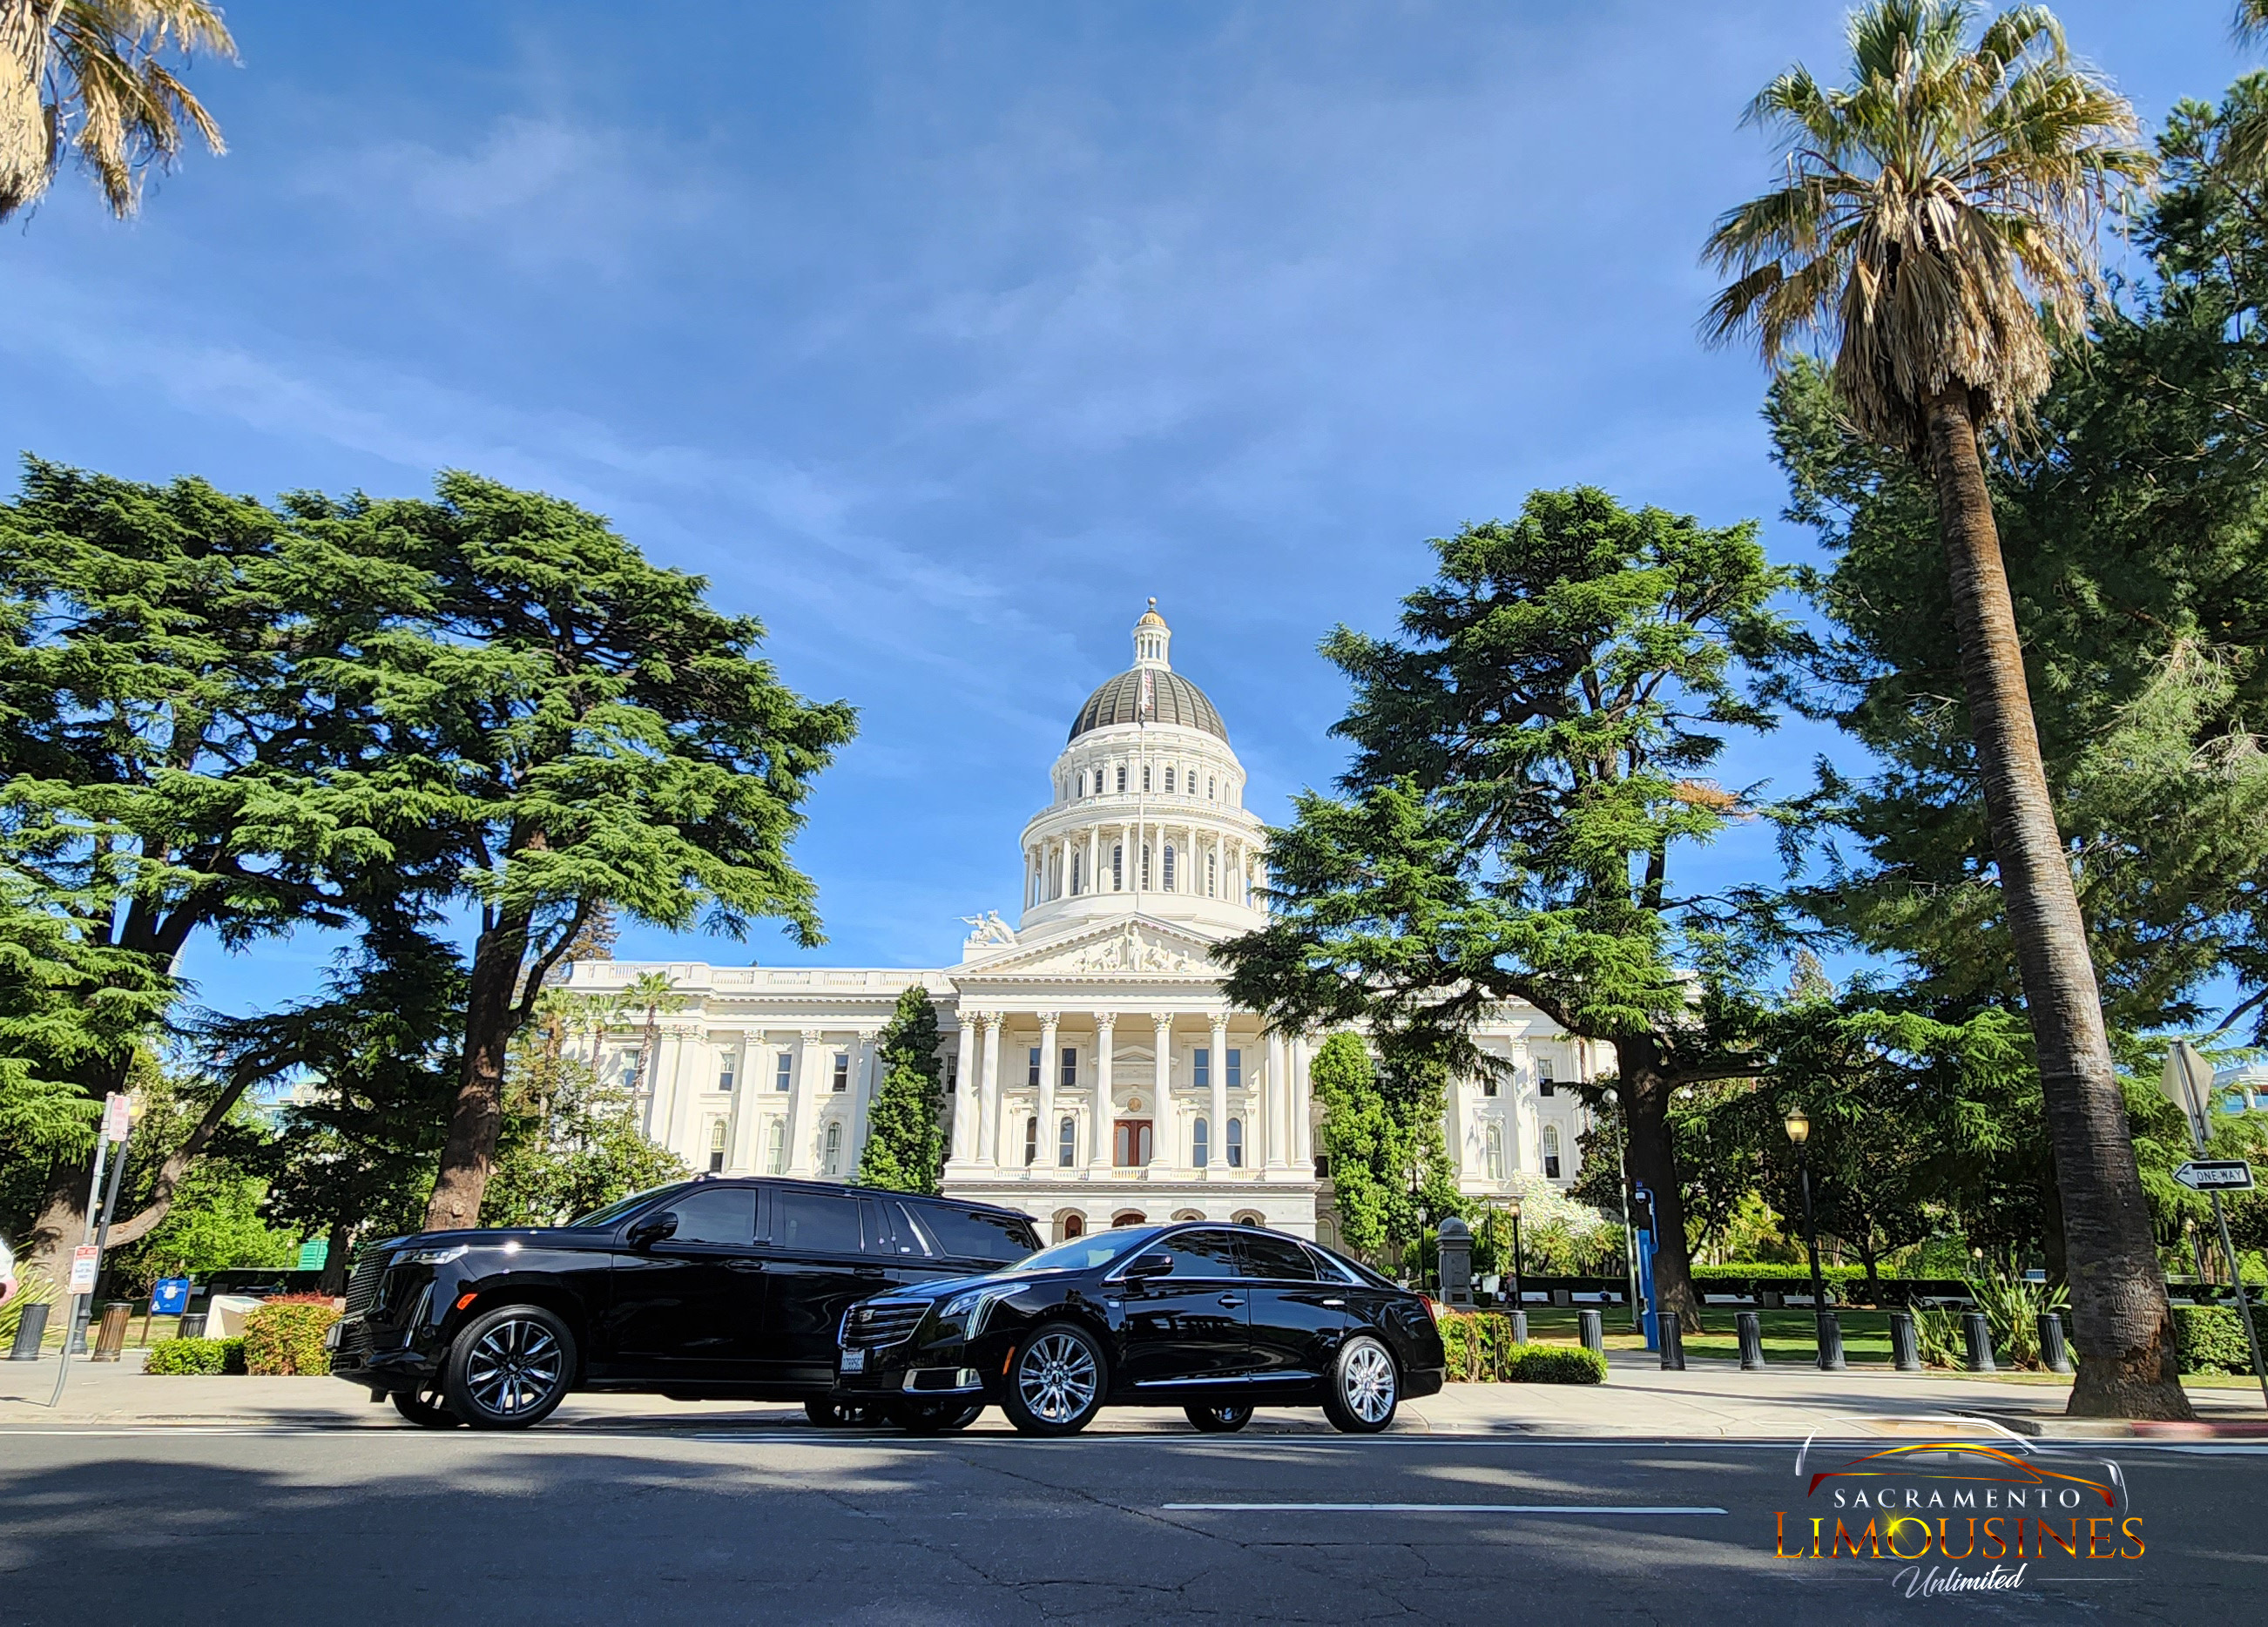 Group_SUV_Escalade_Sedan_Xtsl_Downtown_Capitol_outfront_Centered